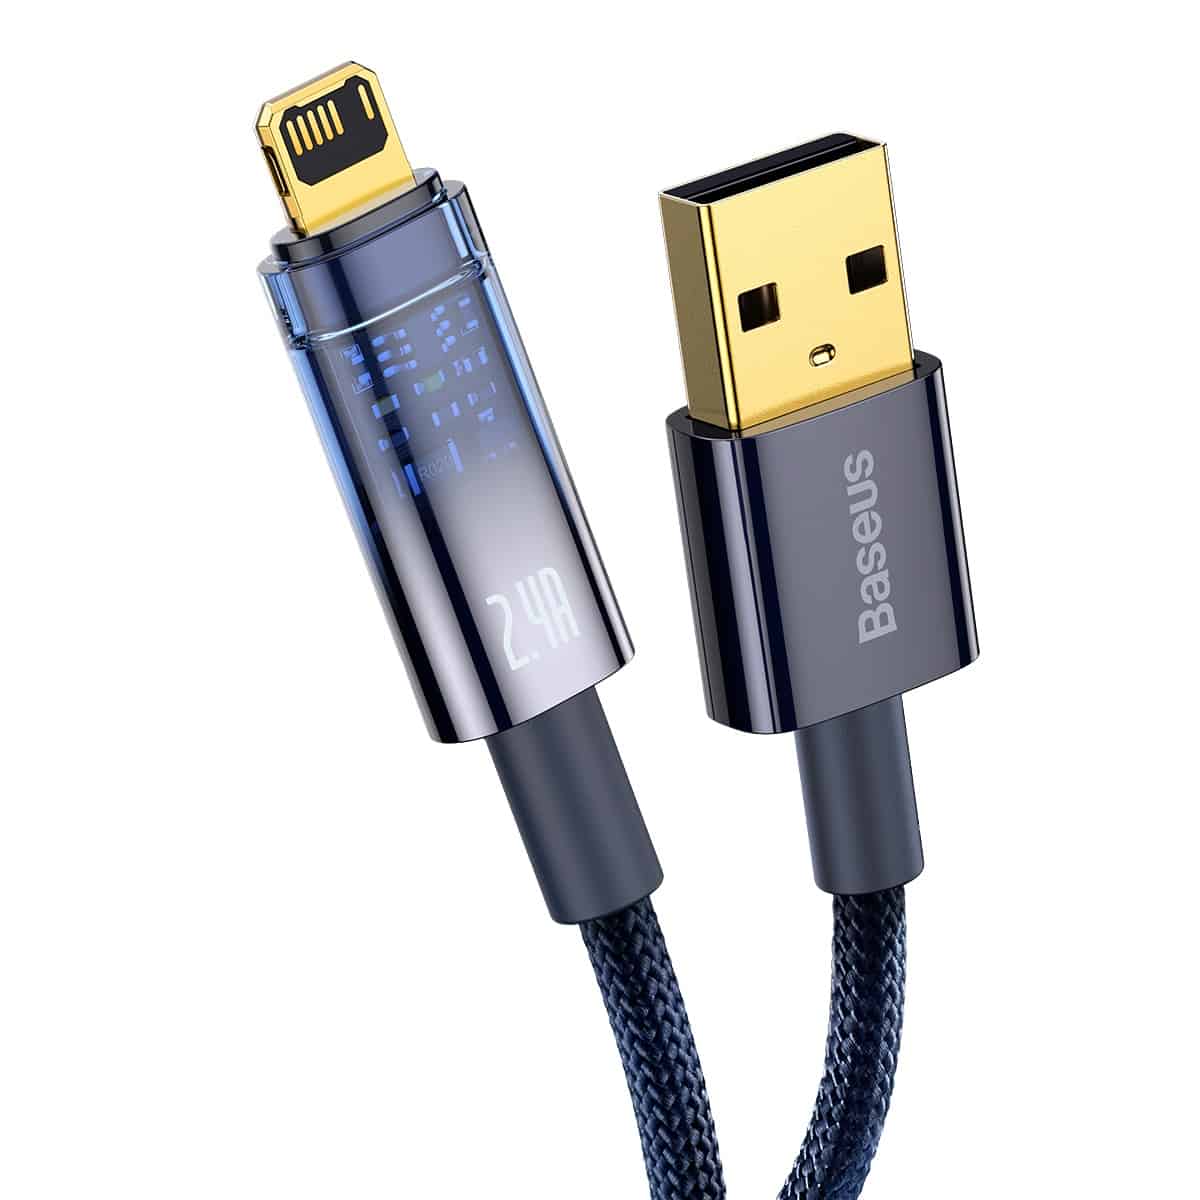 BASEUS EXPLORER SERIES AUTO POWER-OFF FAST CHARGING DATA CABLE USB TO IPH (2.4A)(2M) - Blue